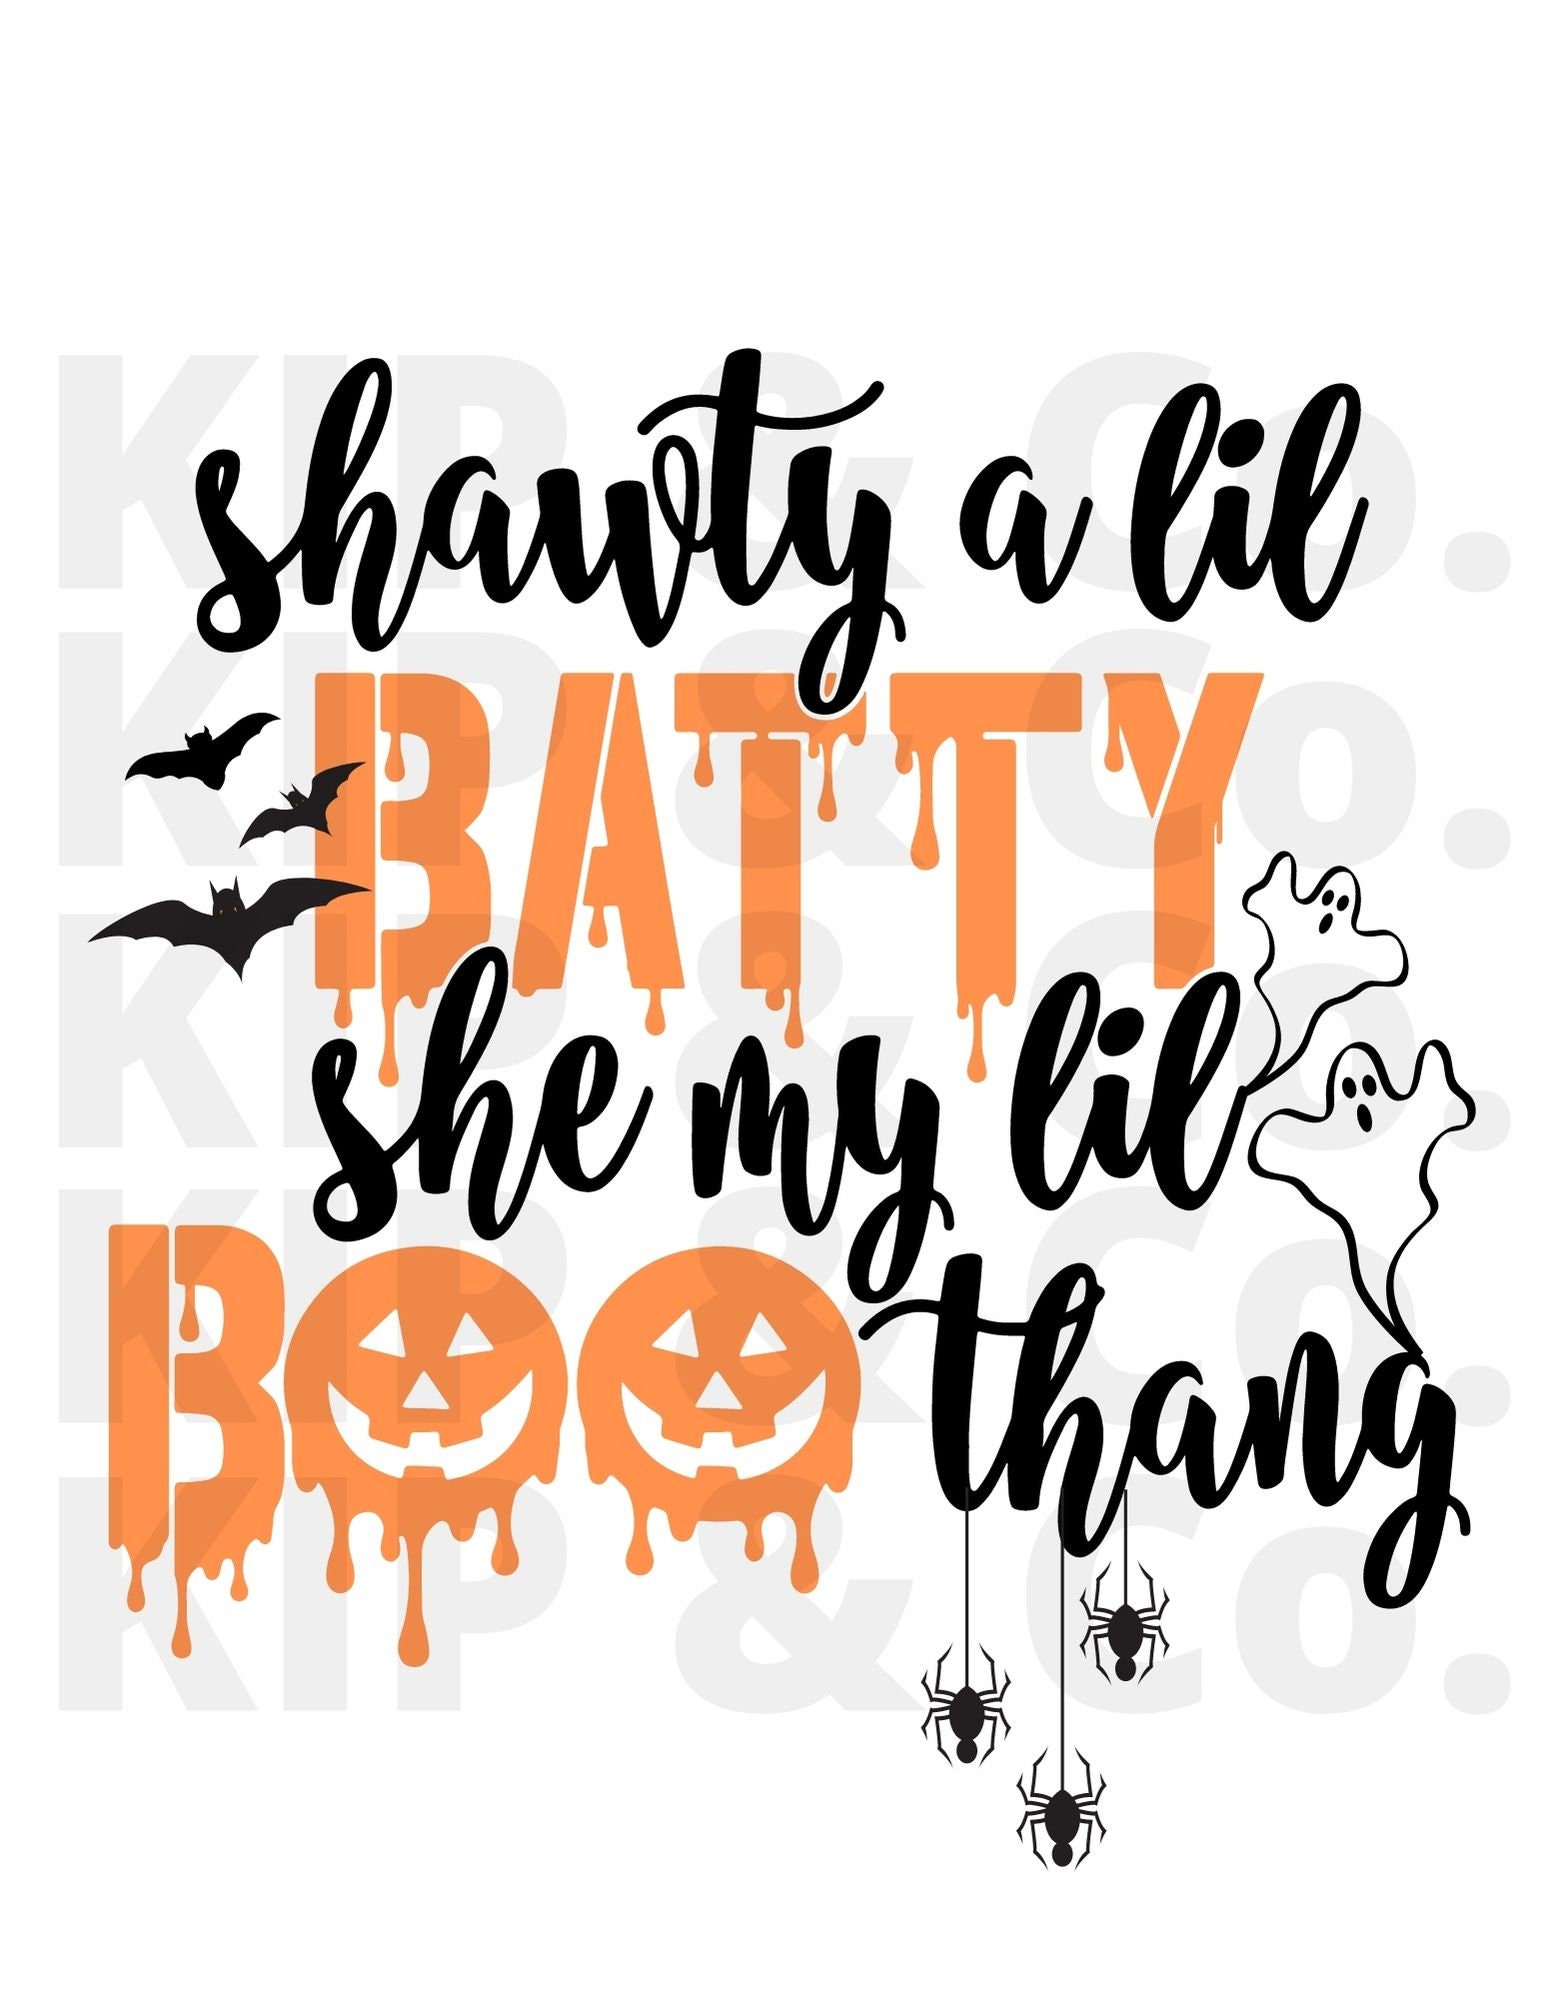 Shorty a Lil Baddie Shawty My Lil Boo Thing - song and lyrics by